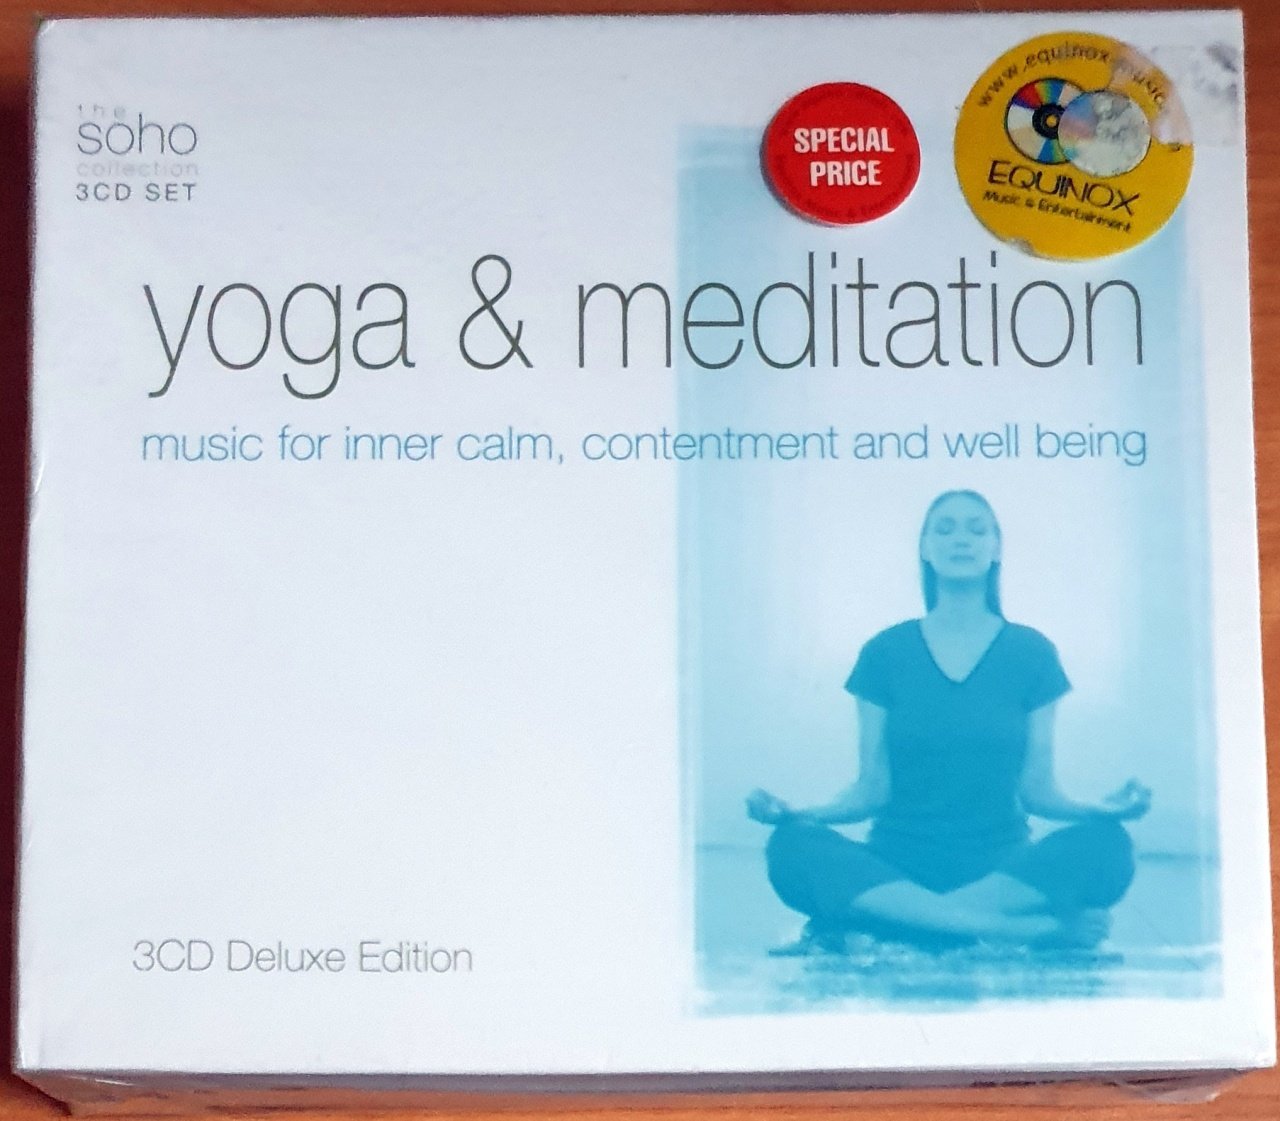 YOGA & MEDITATION / MUSIC FOR INNER CALM, CONTENTMENT AND WELL BEING (2003) - 3CD SIFIR